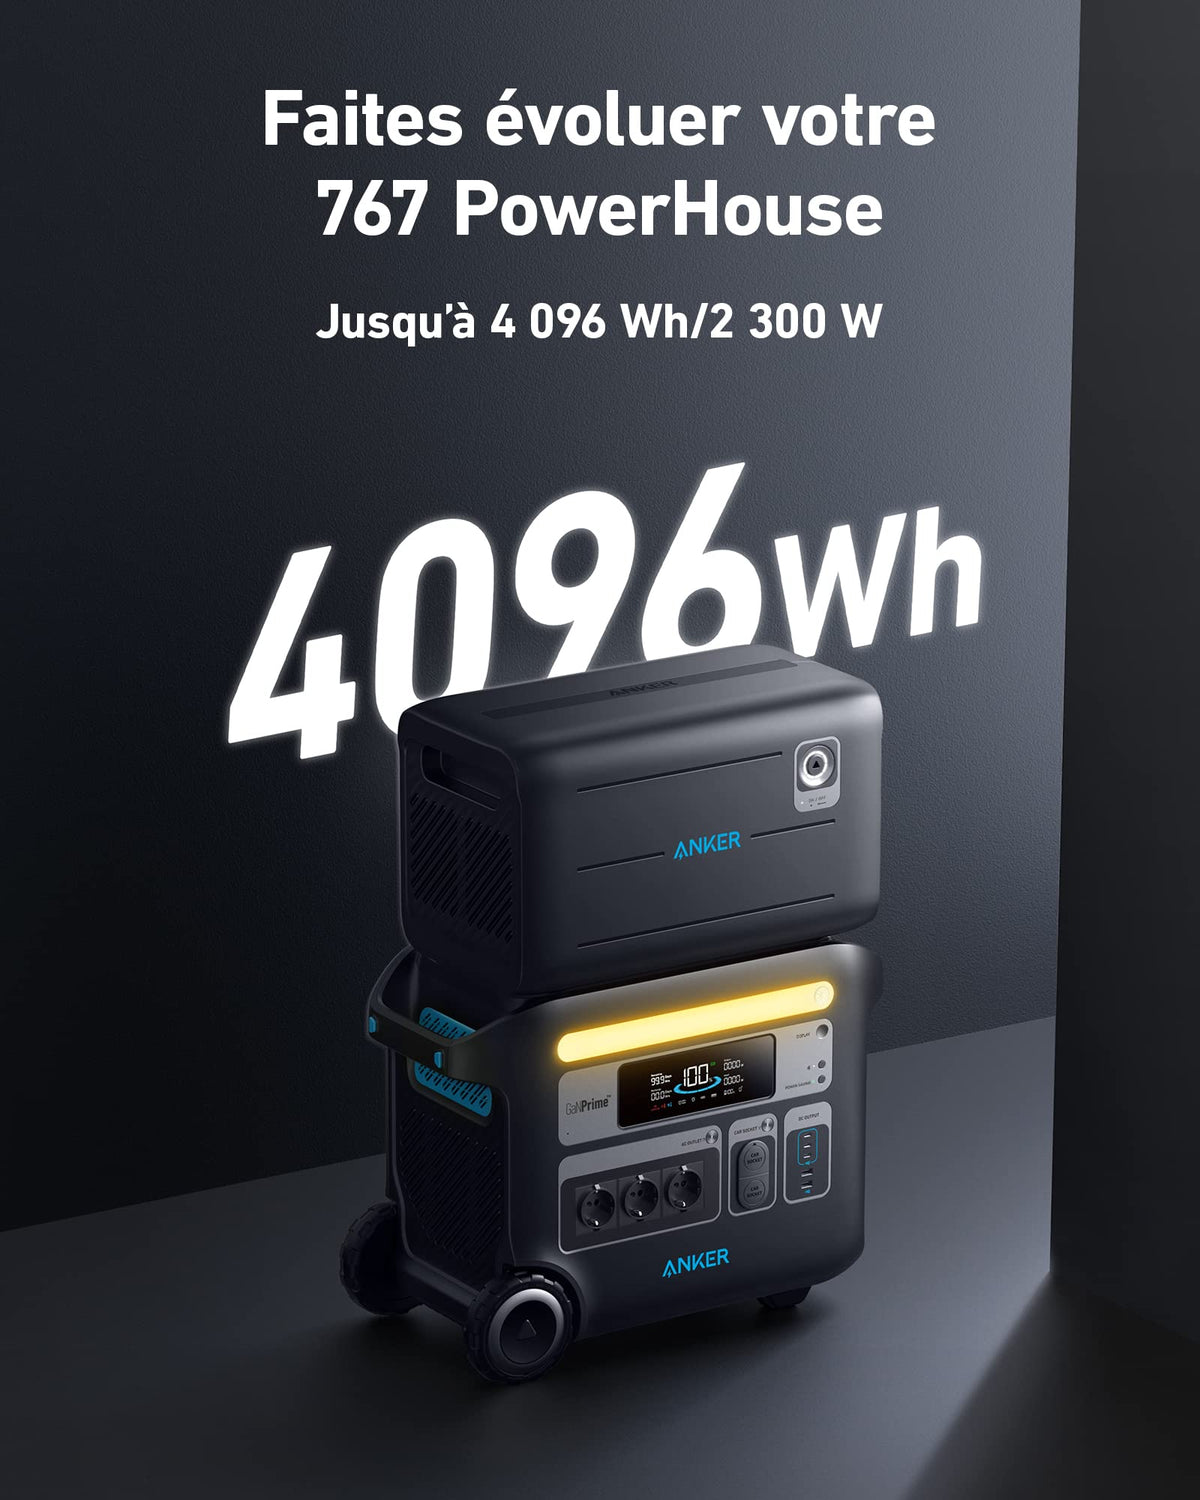 Anker PowerHouse &lt;b&gt;767&lt;/b&gt; with Expansion Battery (2300W | 4096Wh)